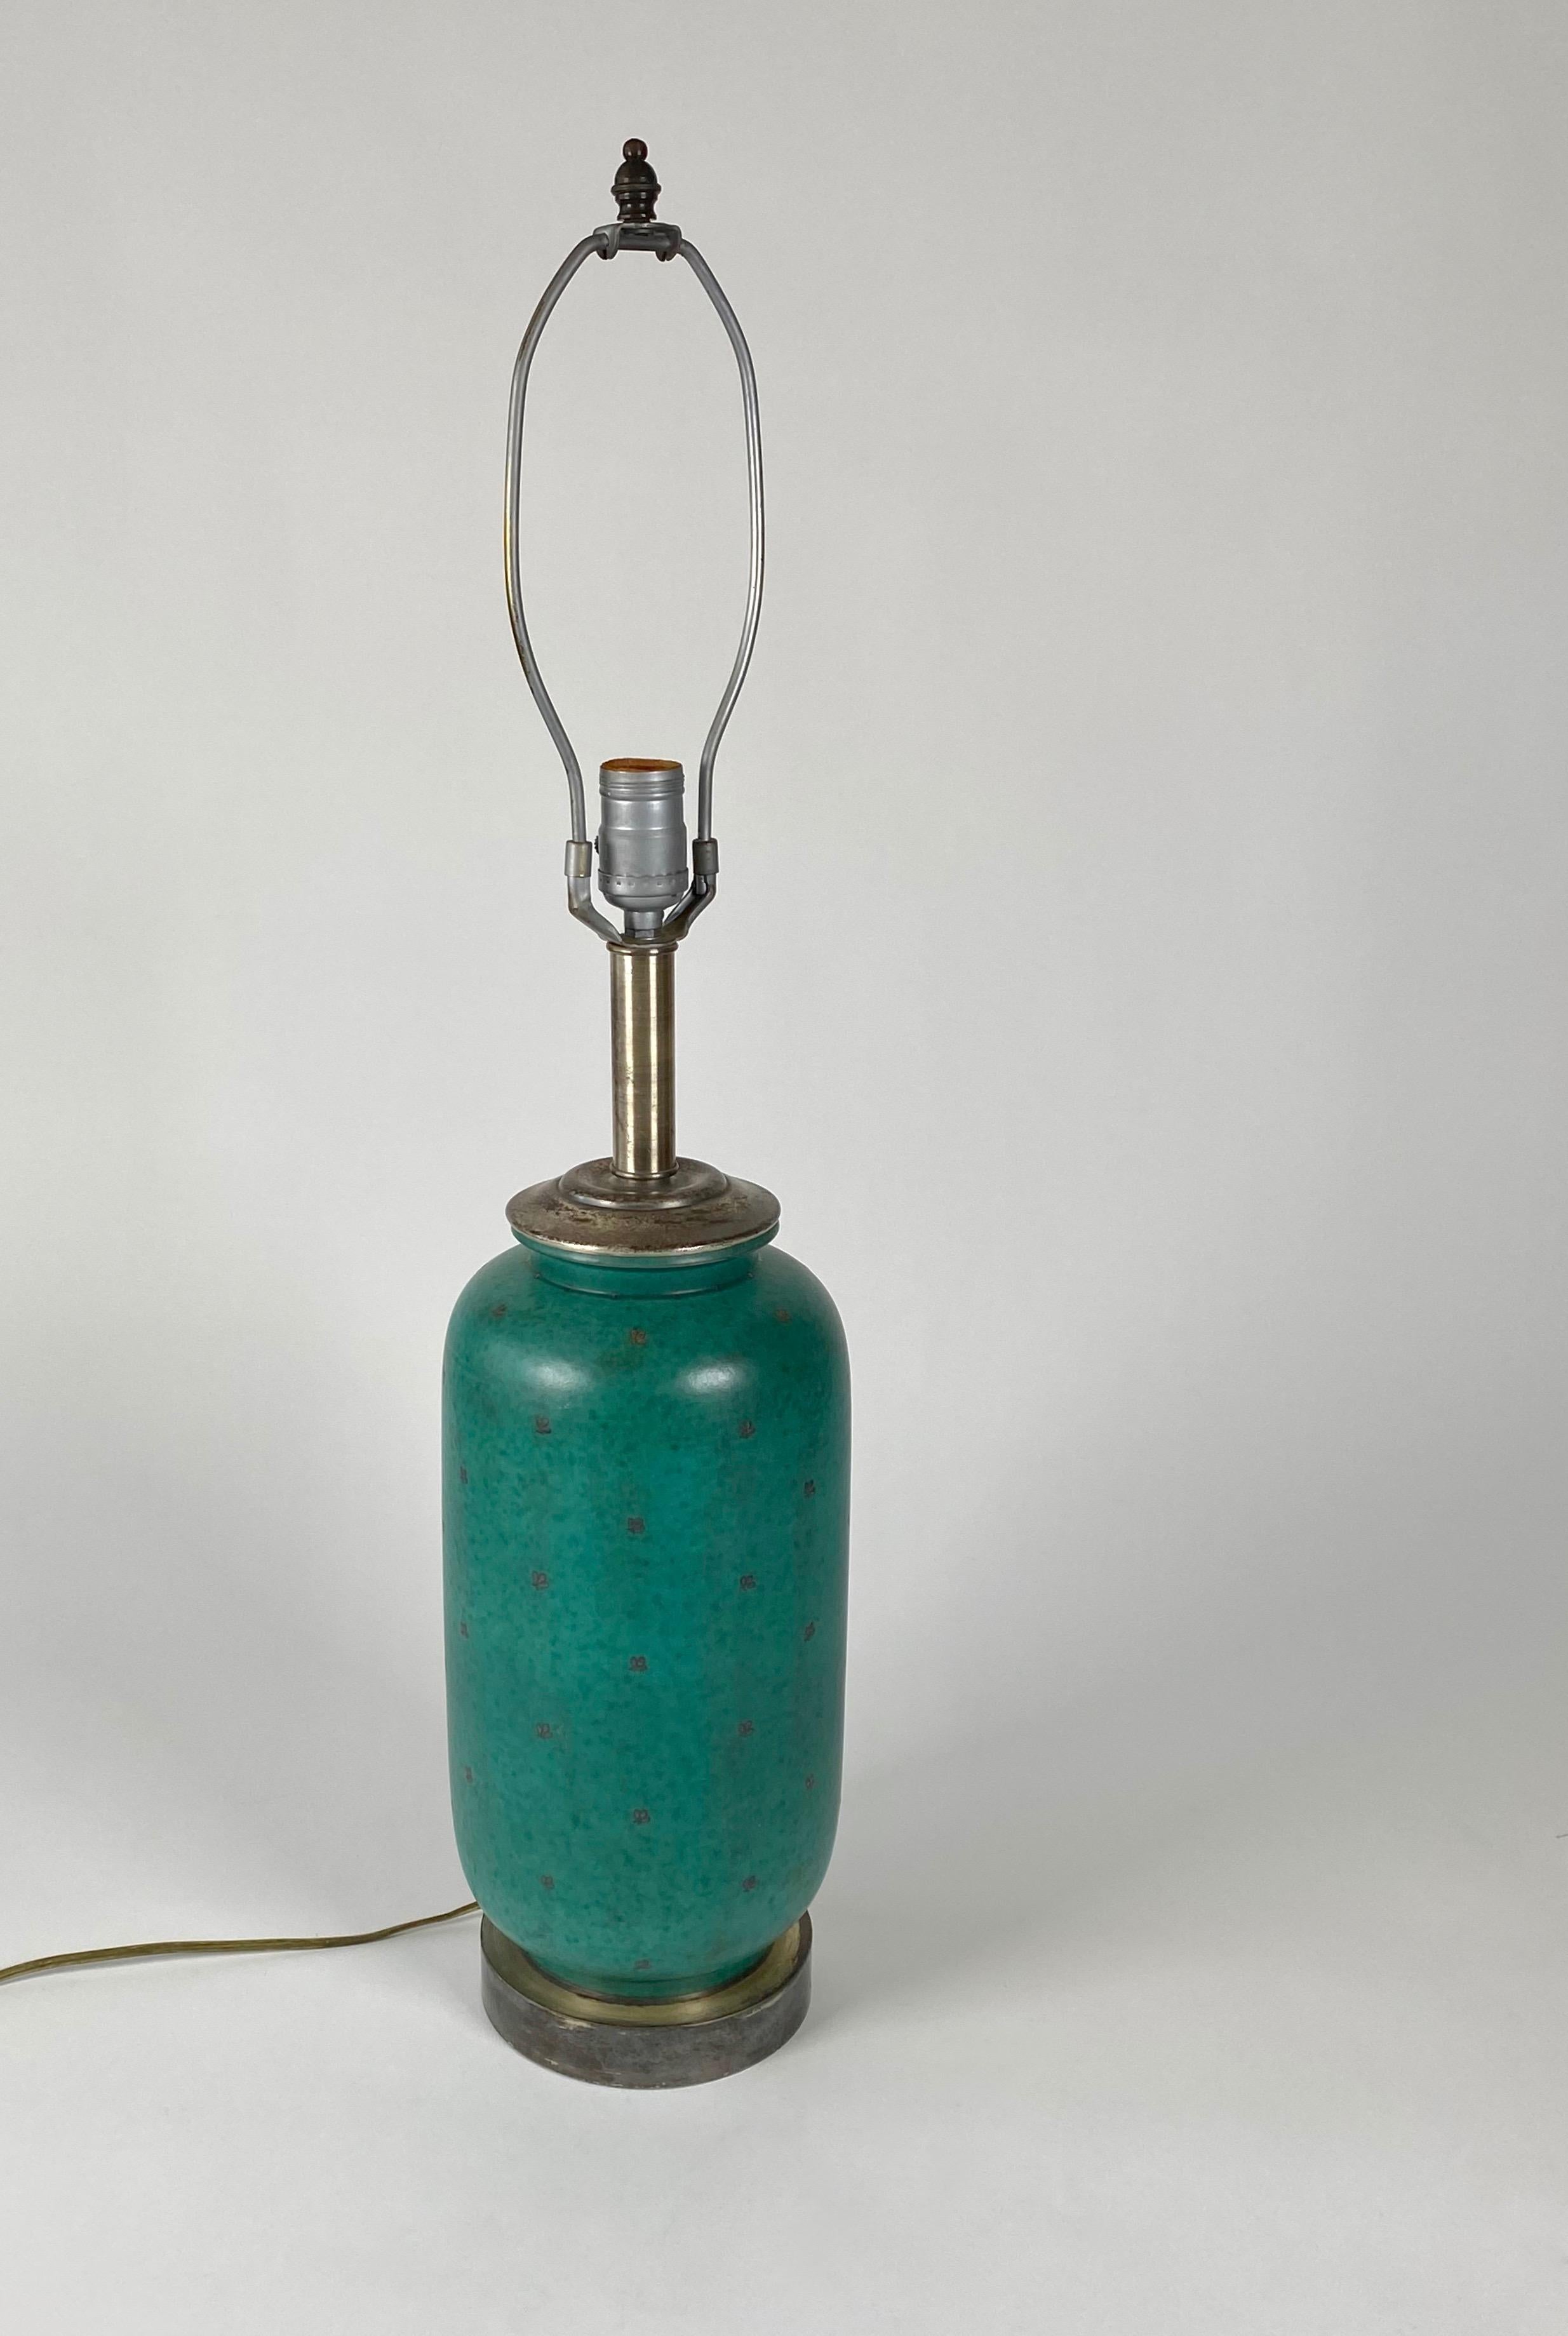 Table lamp by Wihelm Kage for Gustavsberg, Sweden in Argenta Green Stoneware with sterling silver embellishments of small leafs in all original condition unpolished with patina. Beautiful green color contrasts against patinated silver in its